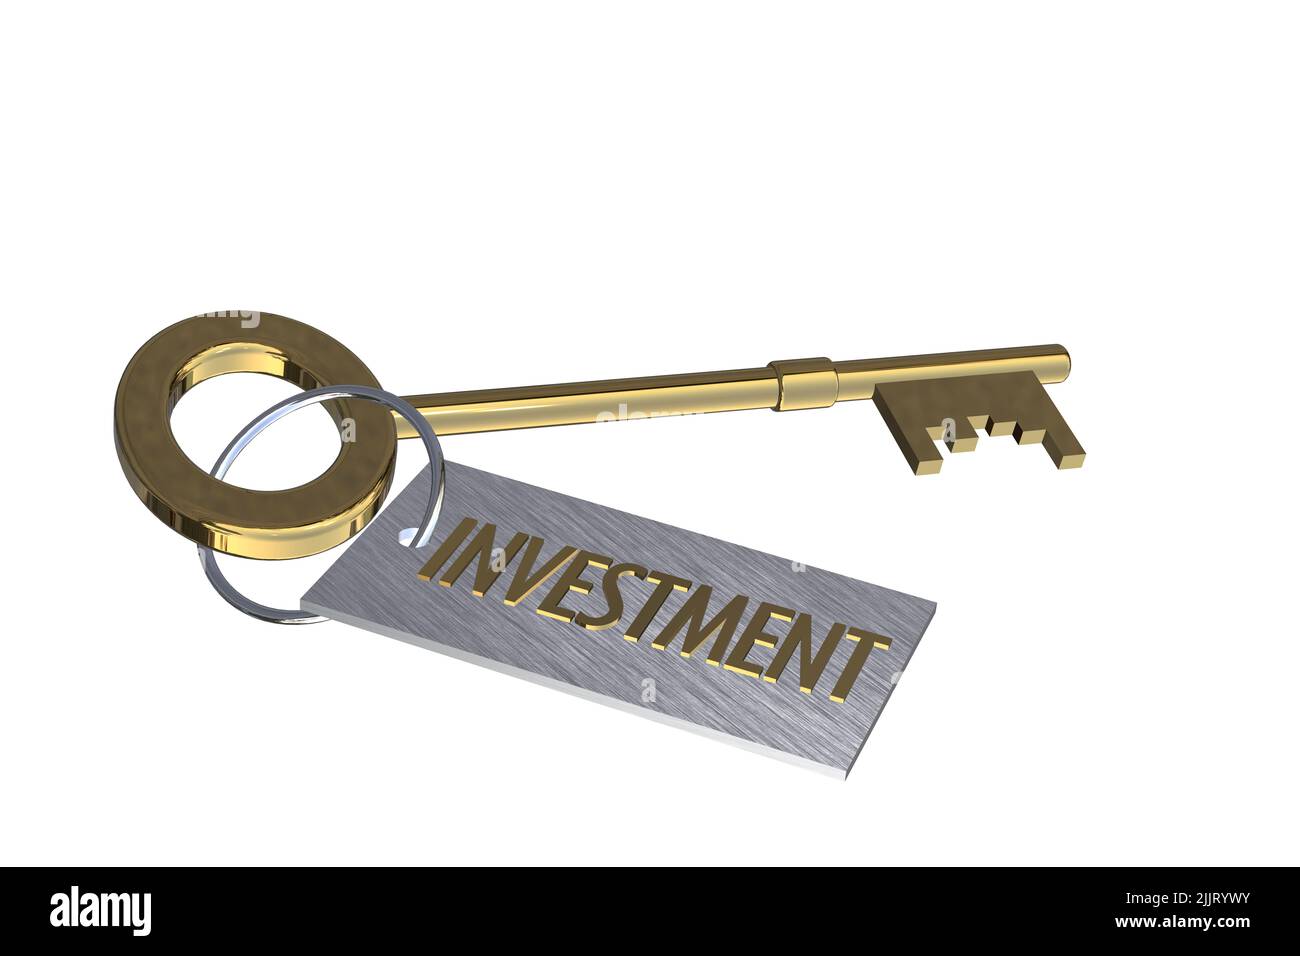 key to investment concept gold 3D key with key ring tag with text word words investment concept cut out isolated on white background Stock Photo